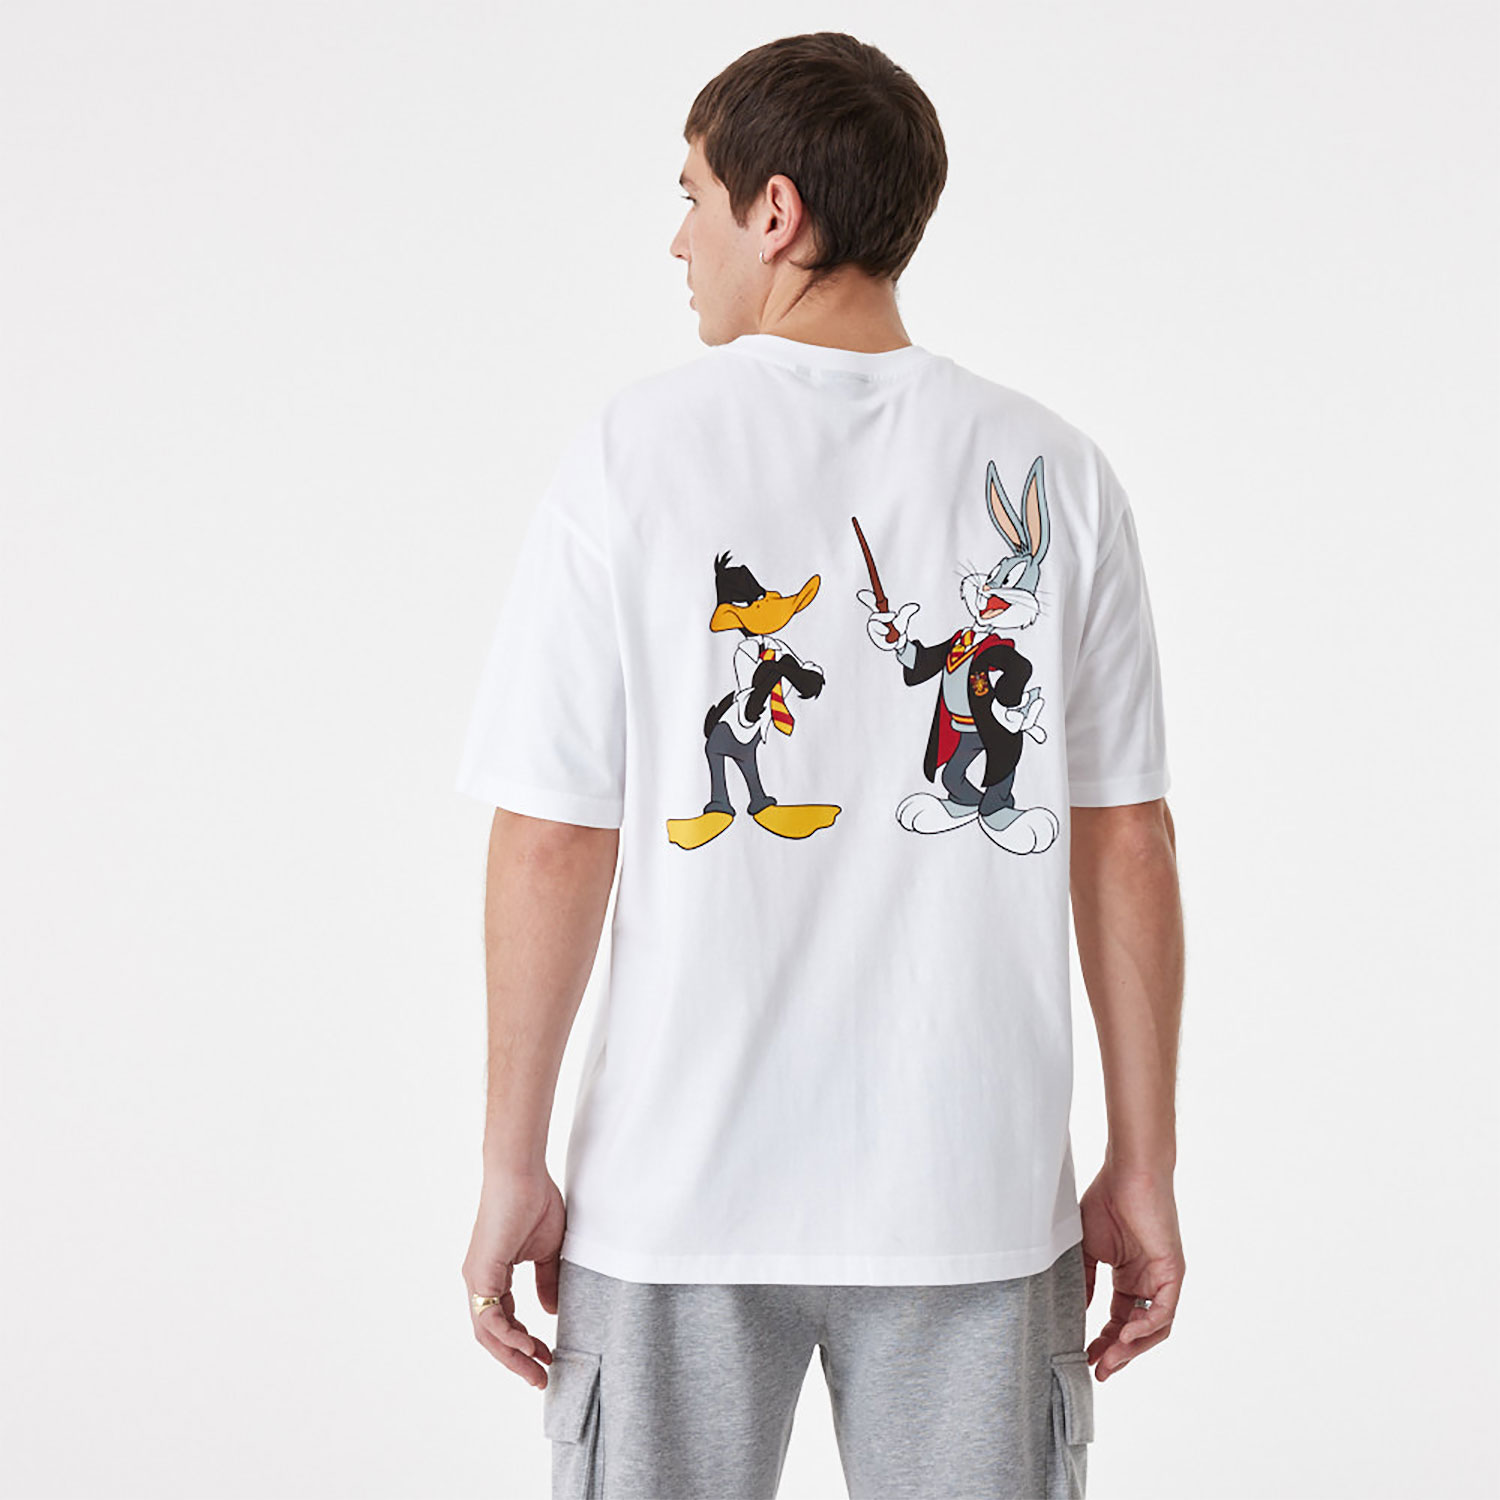 Looney Tunes x Harry Potter Daffy Duck and Bugs Bunny White Oversized T-Shirt